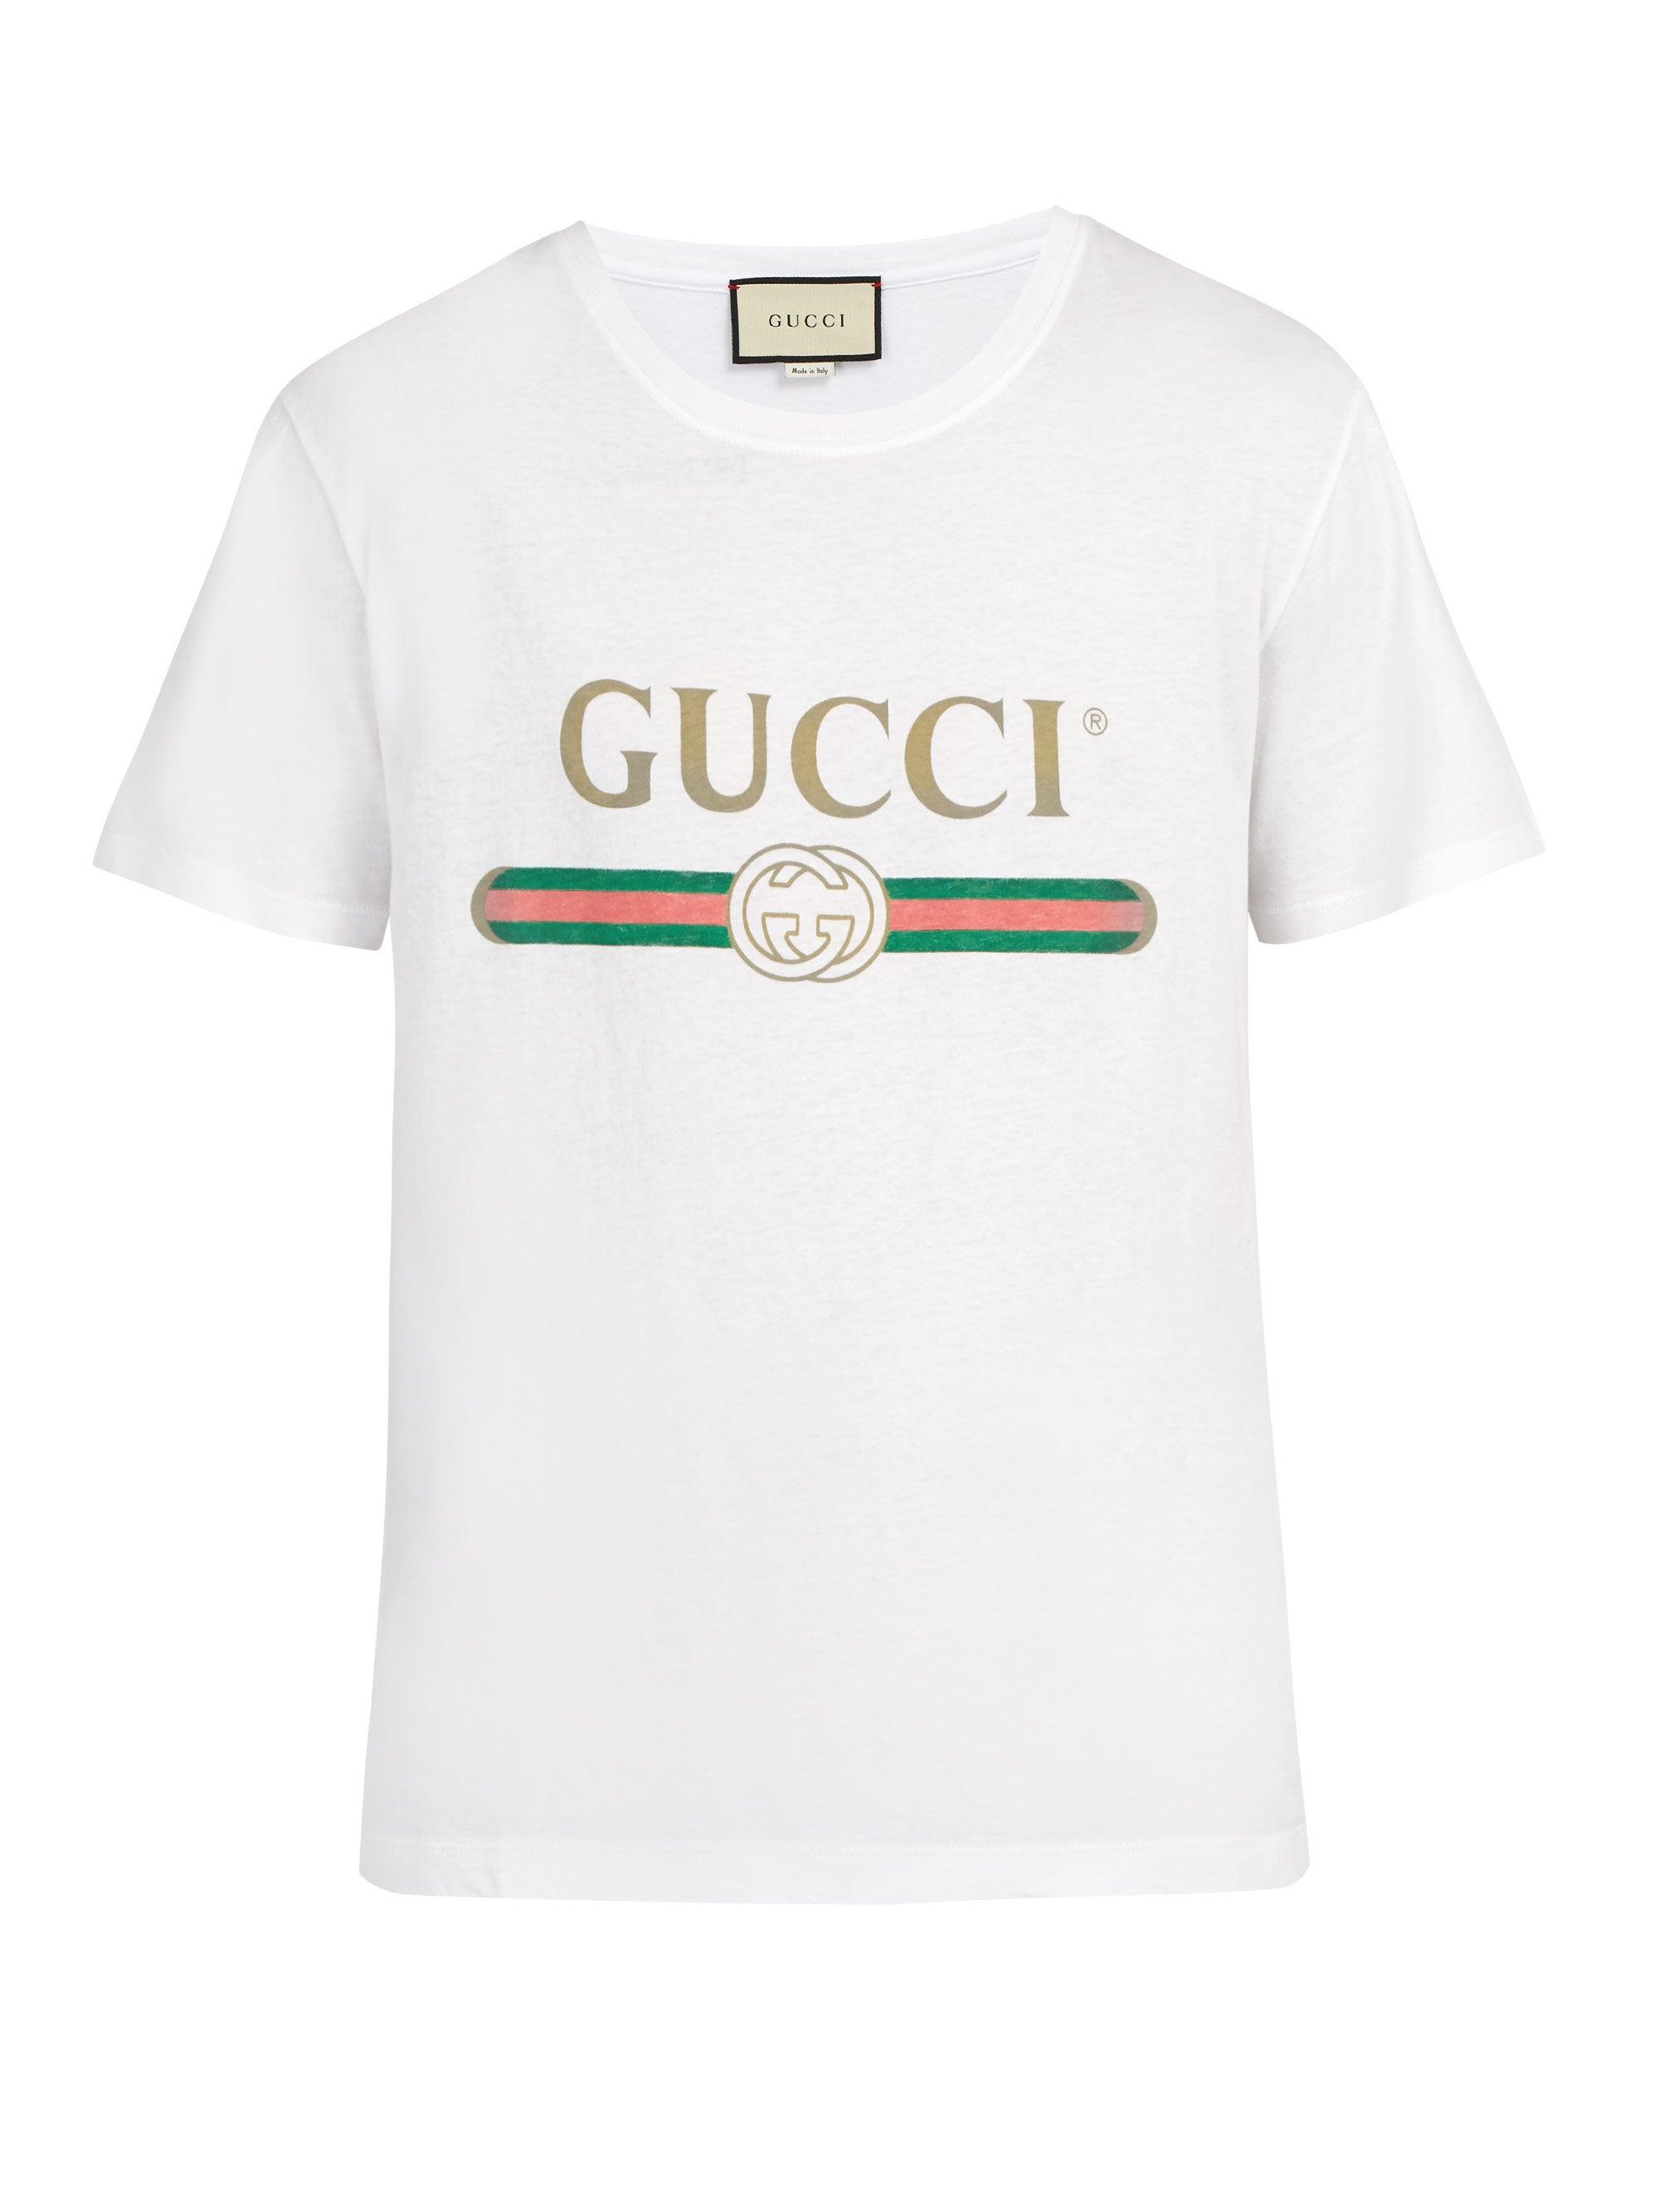 Gucci Archive Logo-print Cotton T-shirt in White for Men - Save 20% - Lyst